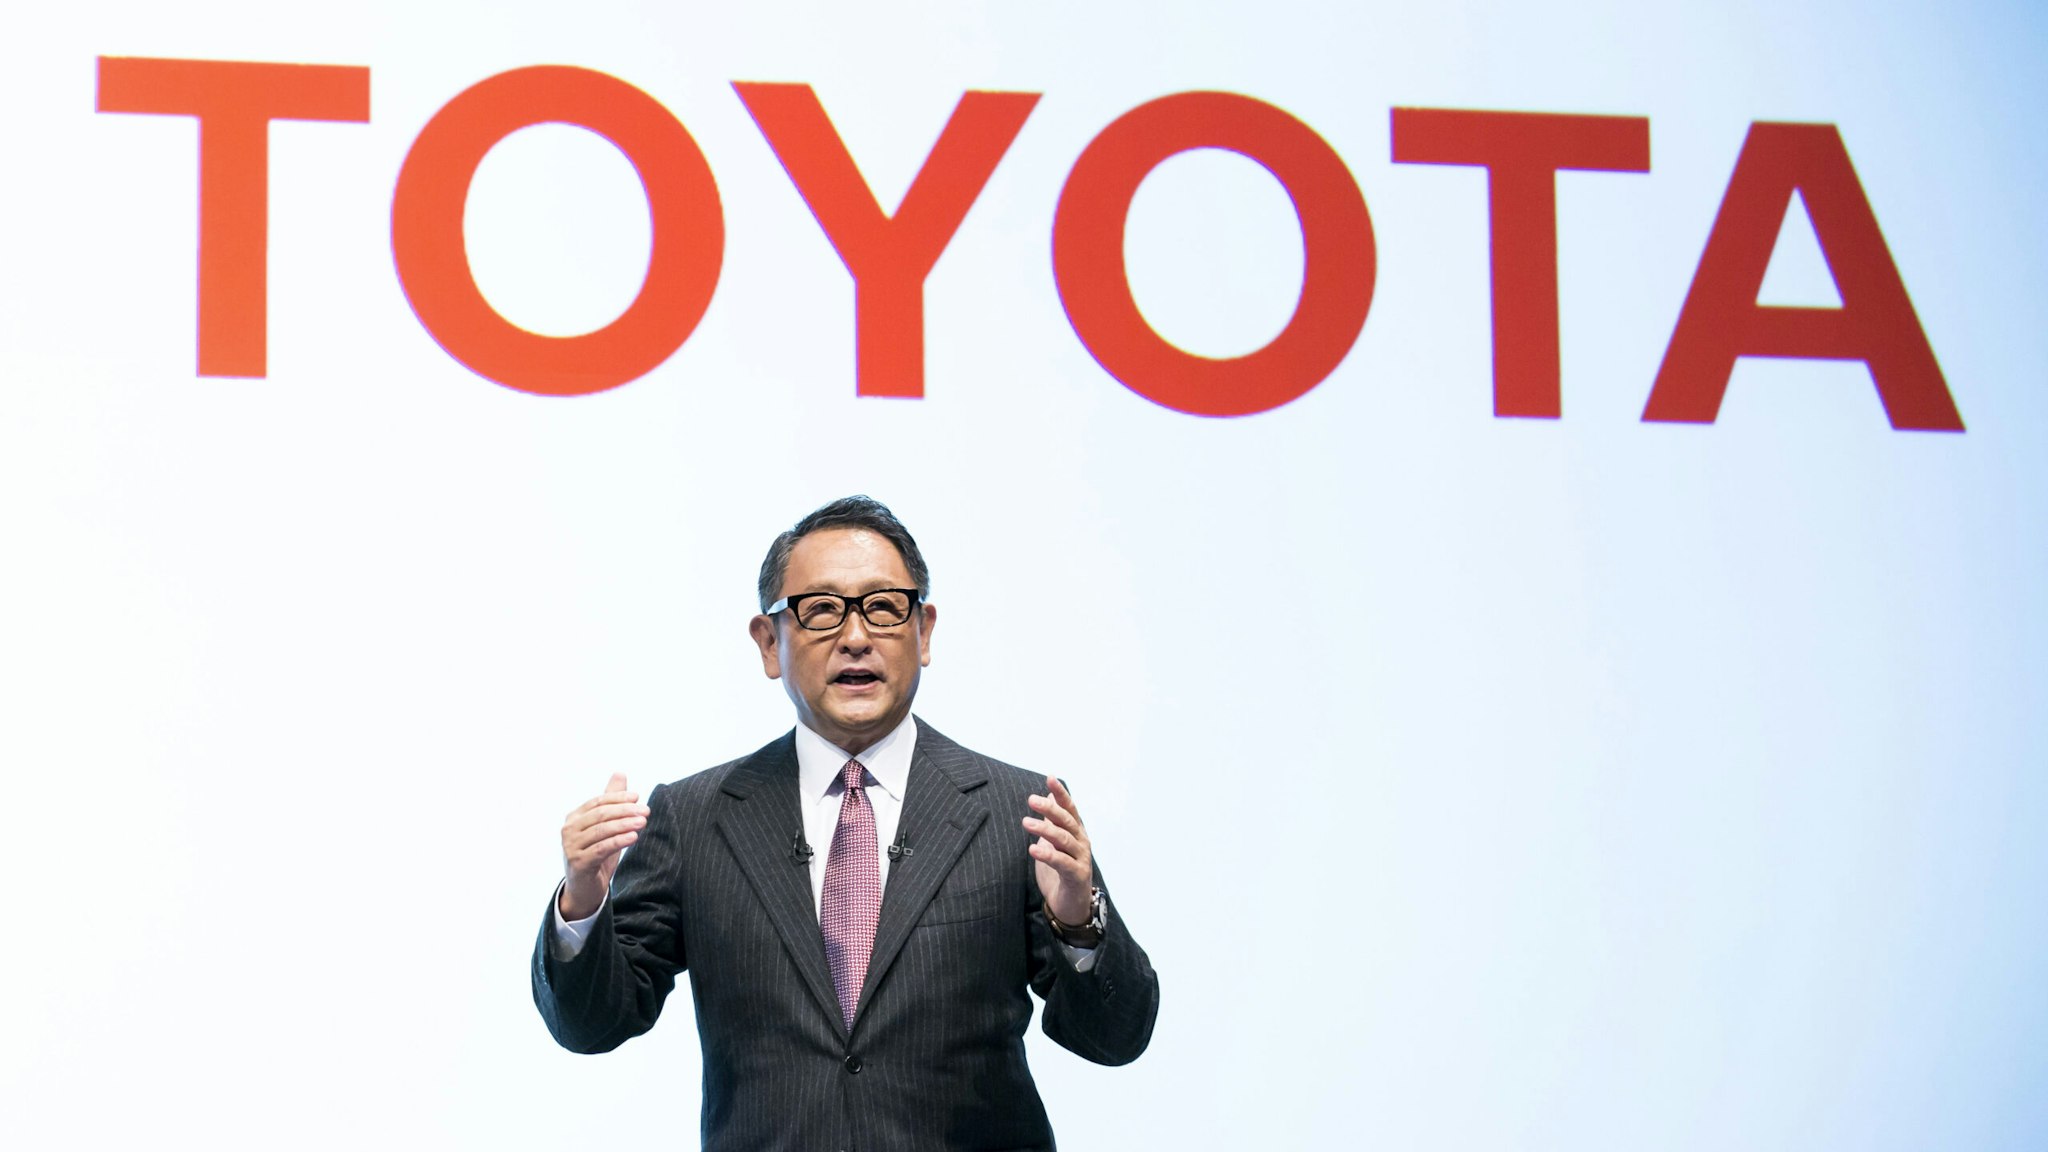 TOKYO, JAPAN - OCTOBER 04: Toyota Motor Corp. President Akio Toyoda speaks during a joint press conference with SoftBank Group Corp. on October 4, 2018 in Tokyo, Japan. Softbank and Toyota announced today their partnership to establish a joint venture for new mobility services.